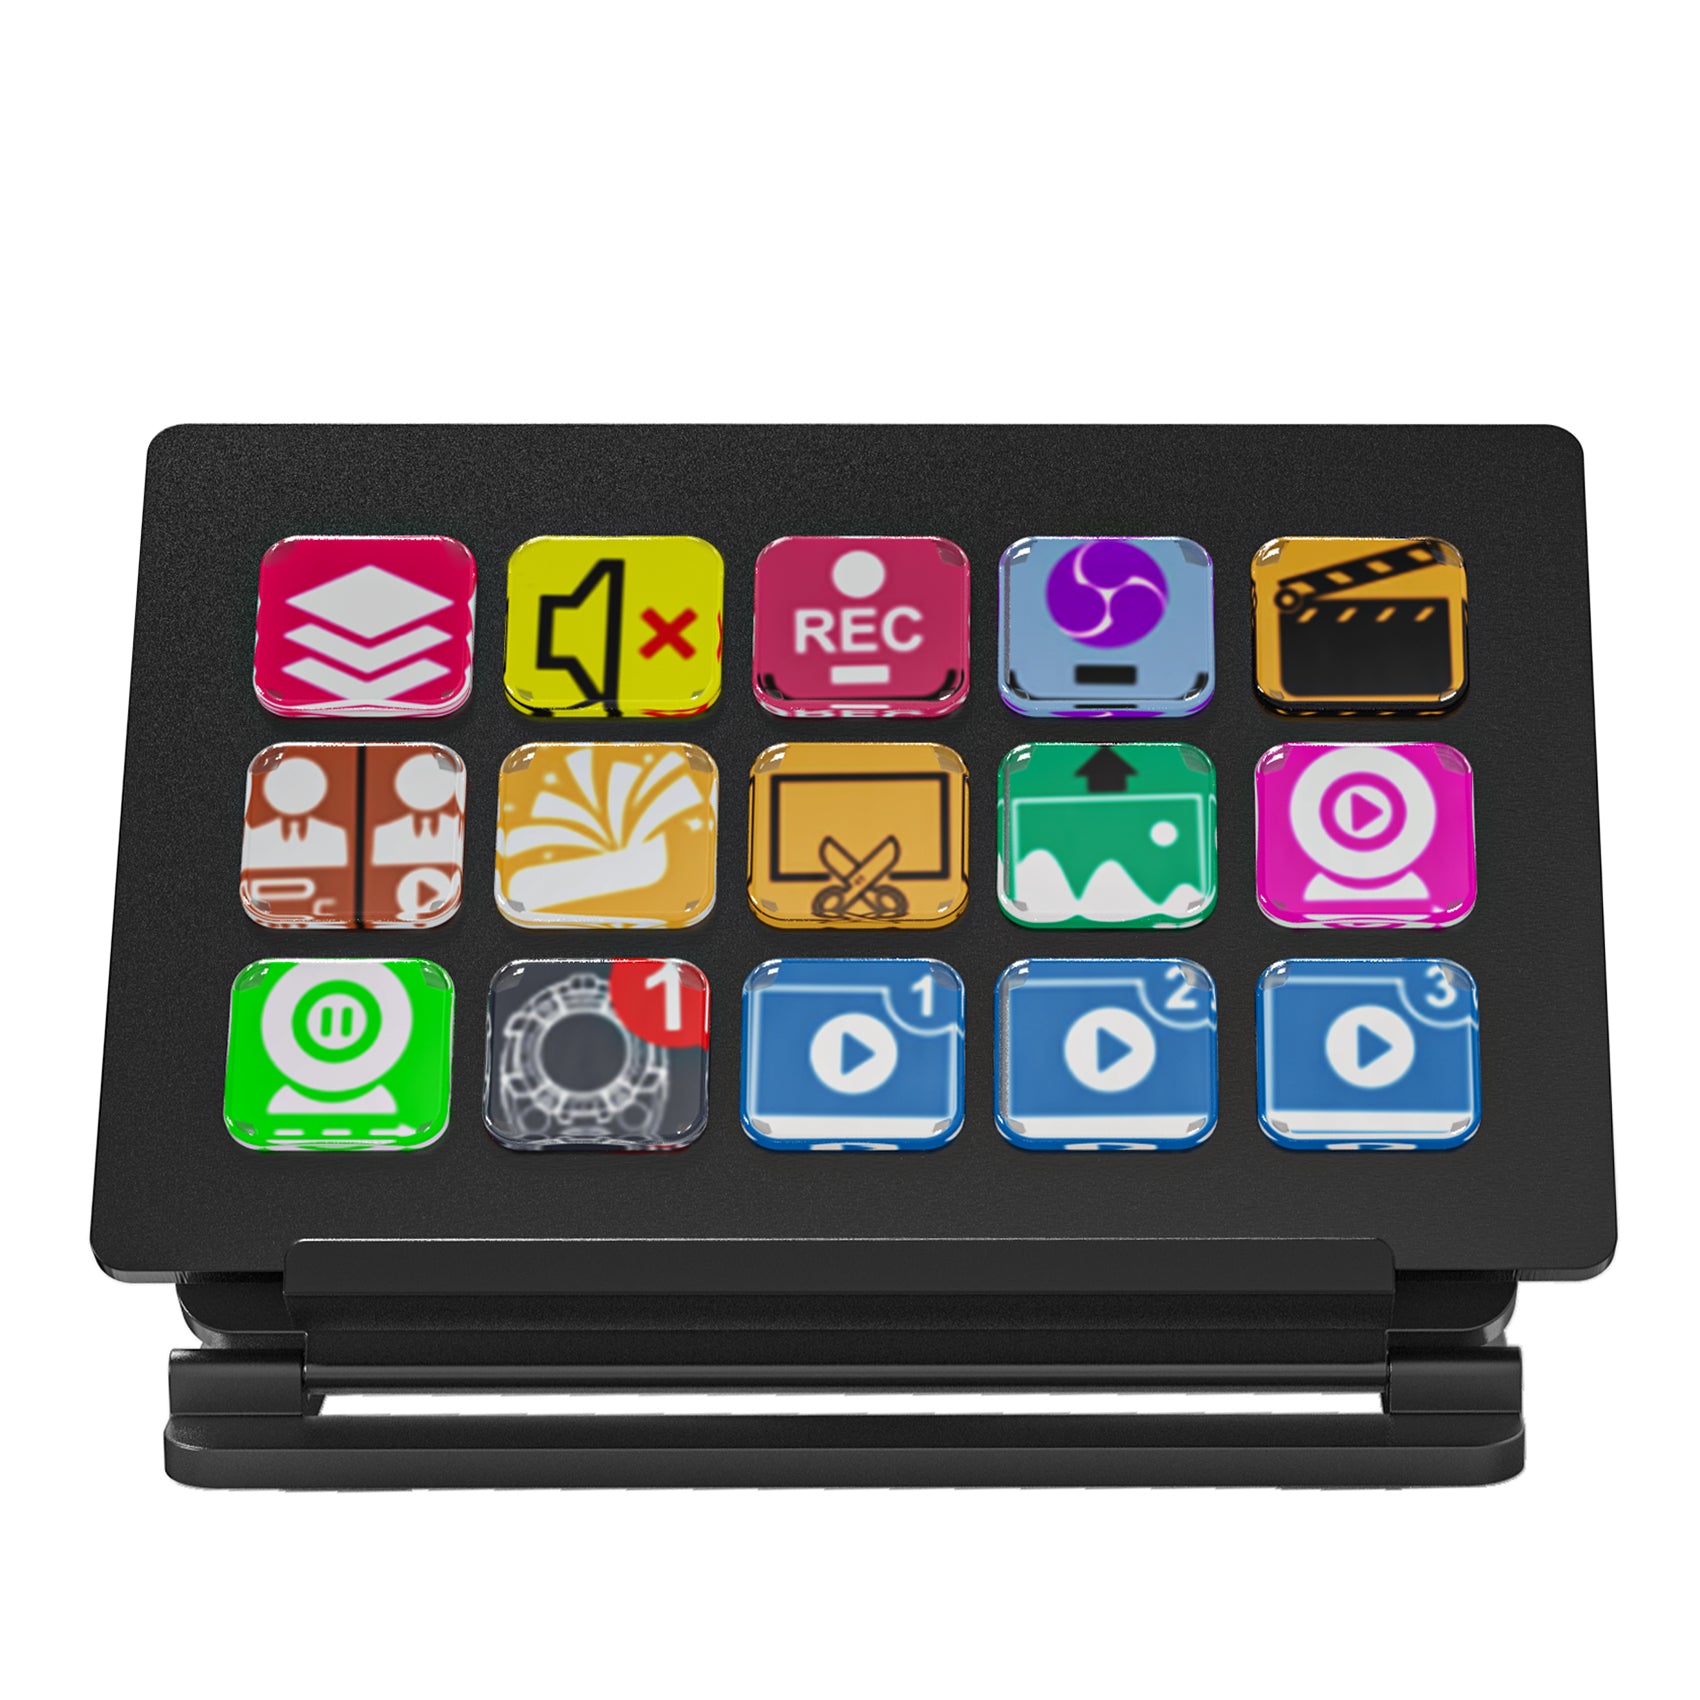 Stream Deck - Live Production Controller With 15 Customizable LCD Keys And Adjustable Stand, Trigger Actions In OBS Studio, Streamlabs, Twitch, Youtube And More, PC/Mac